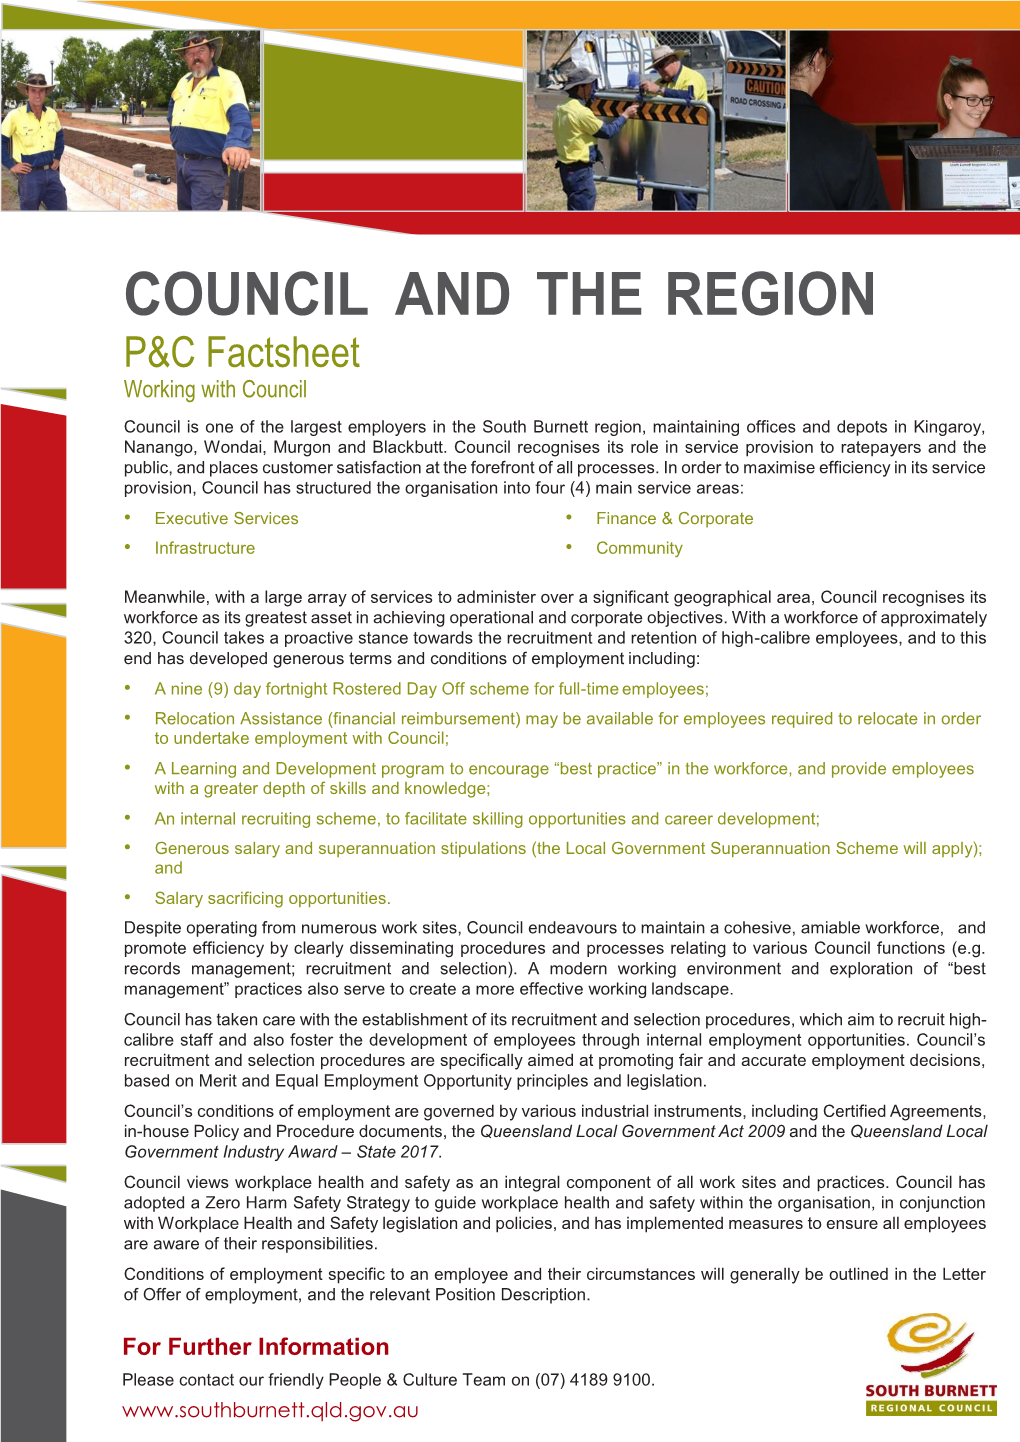 Council and the Region